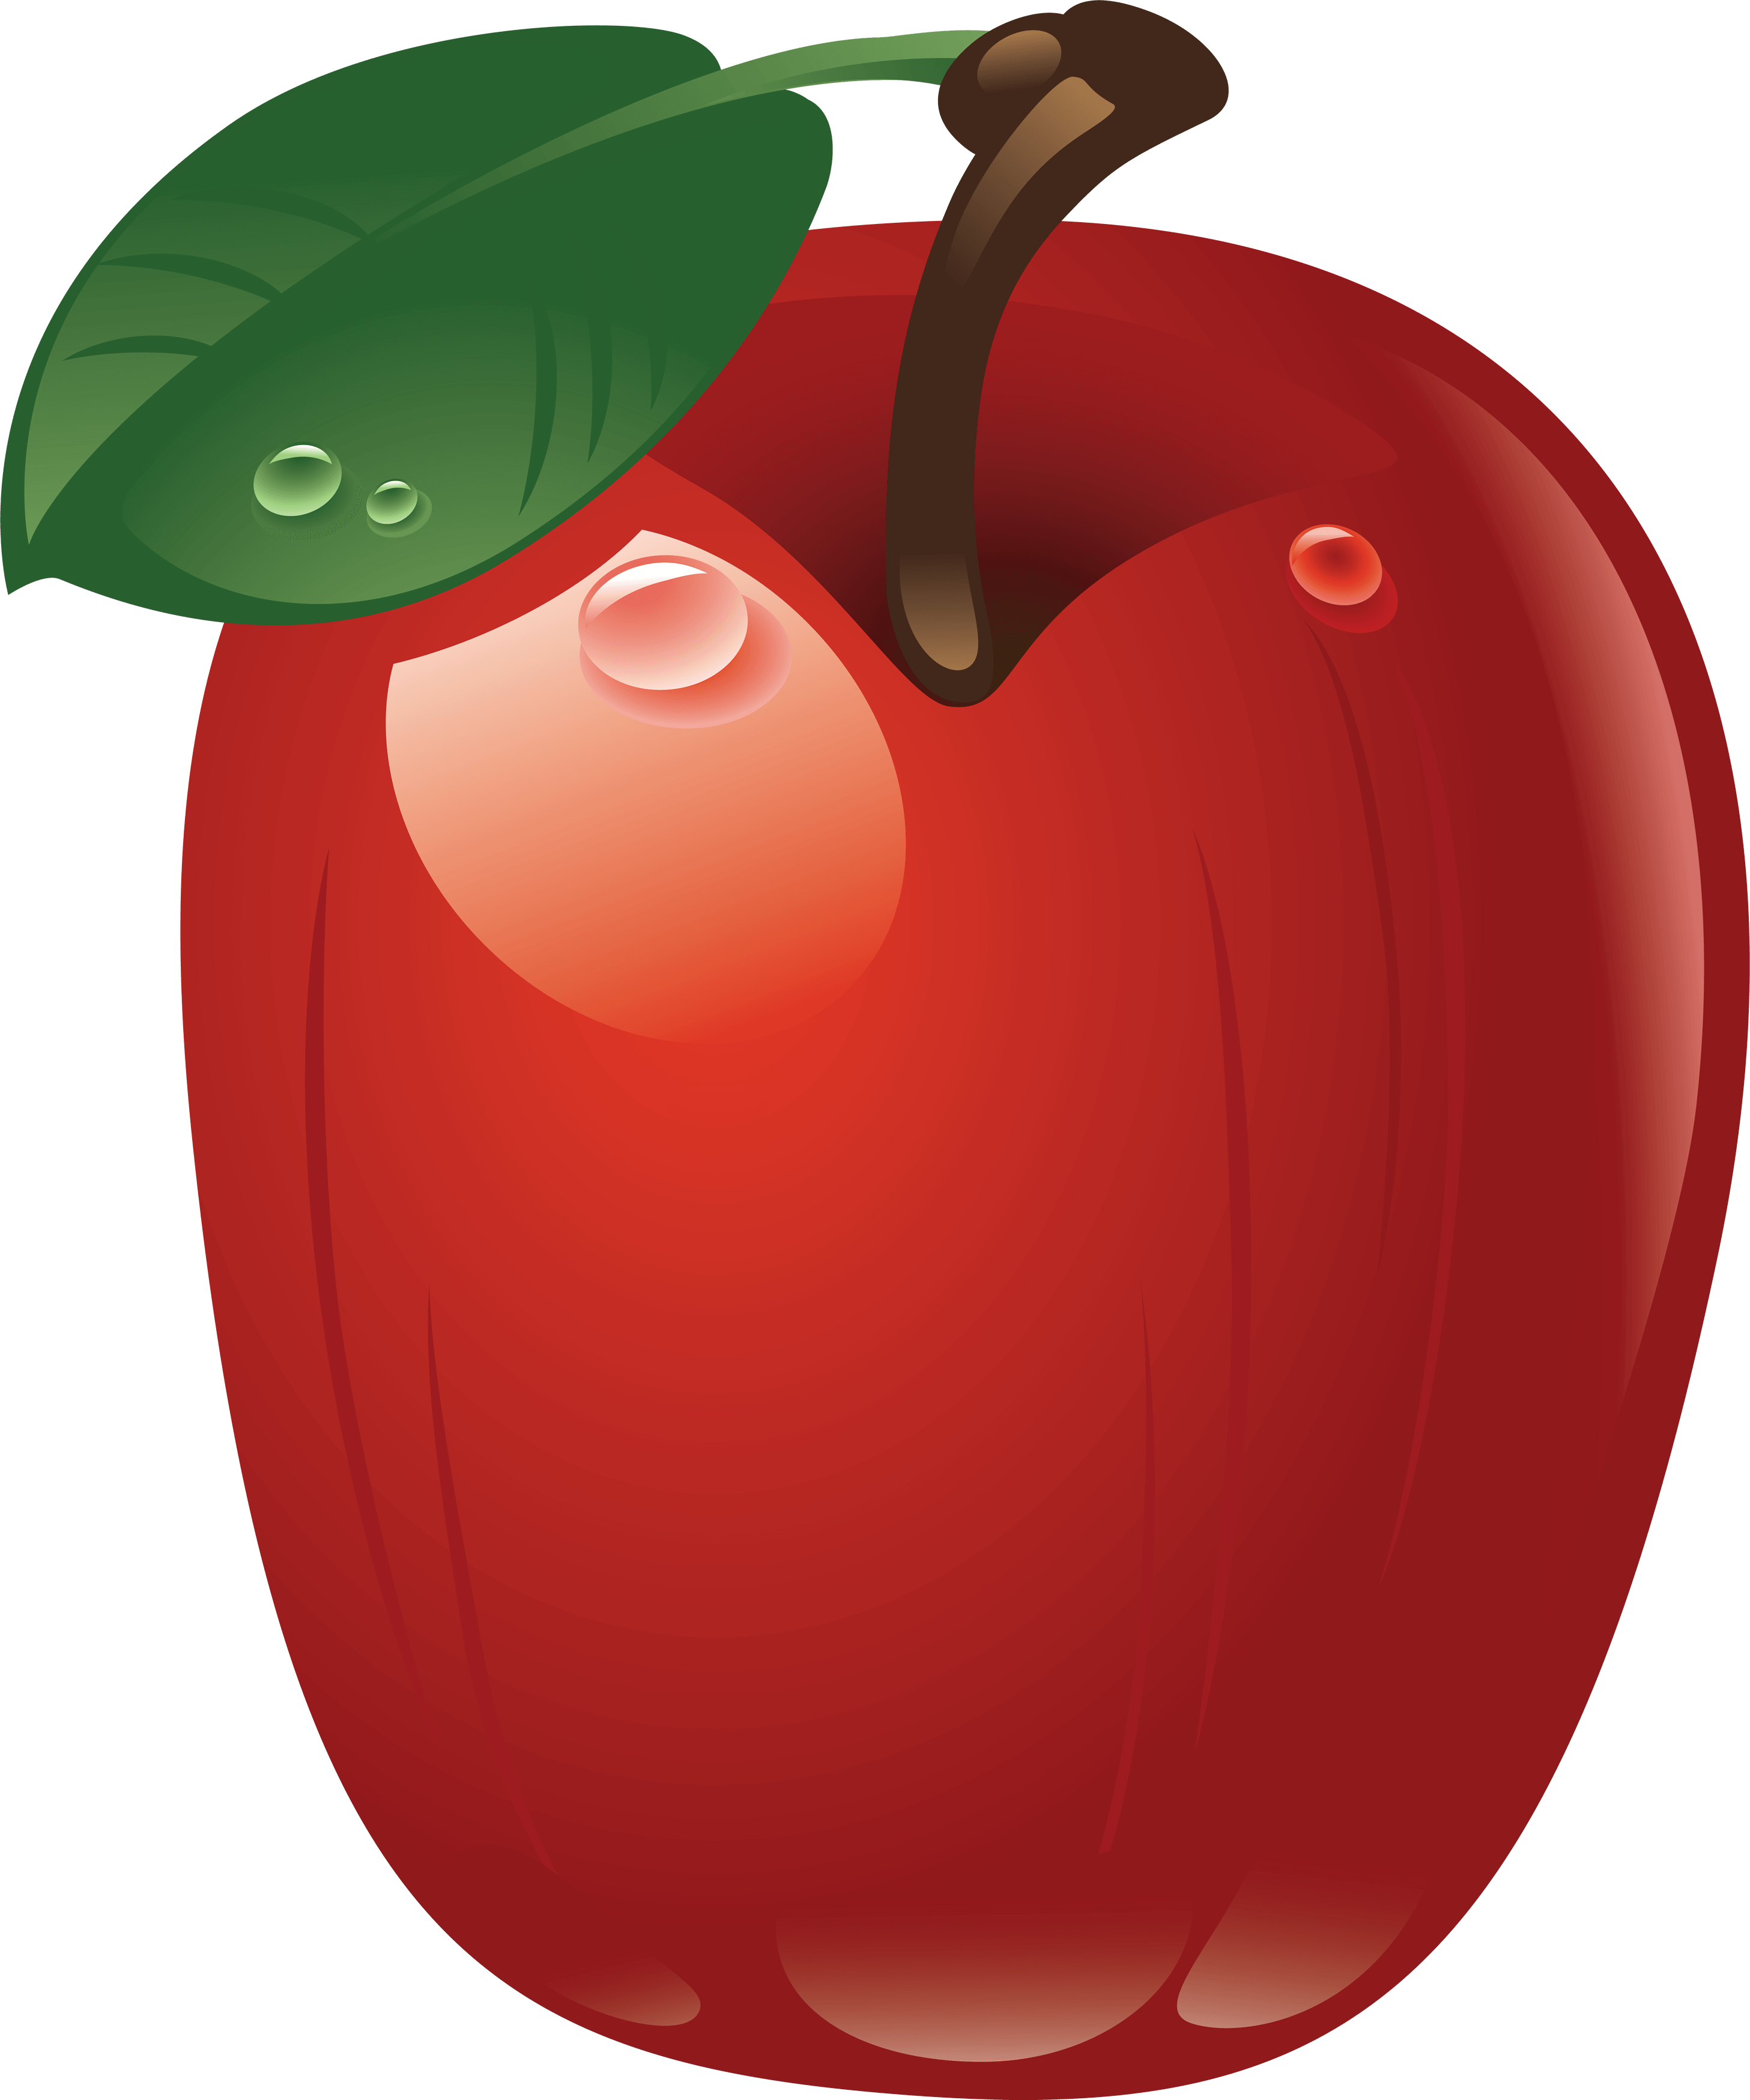 63 red apple png image